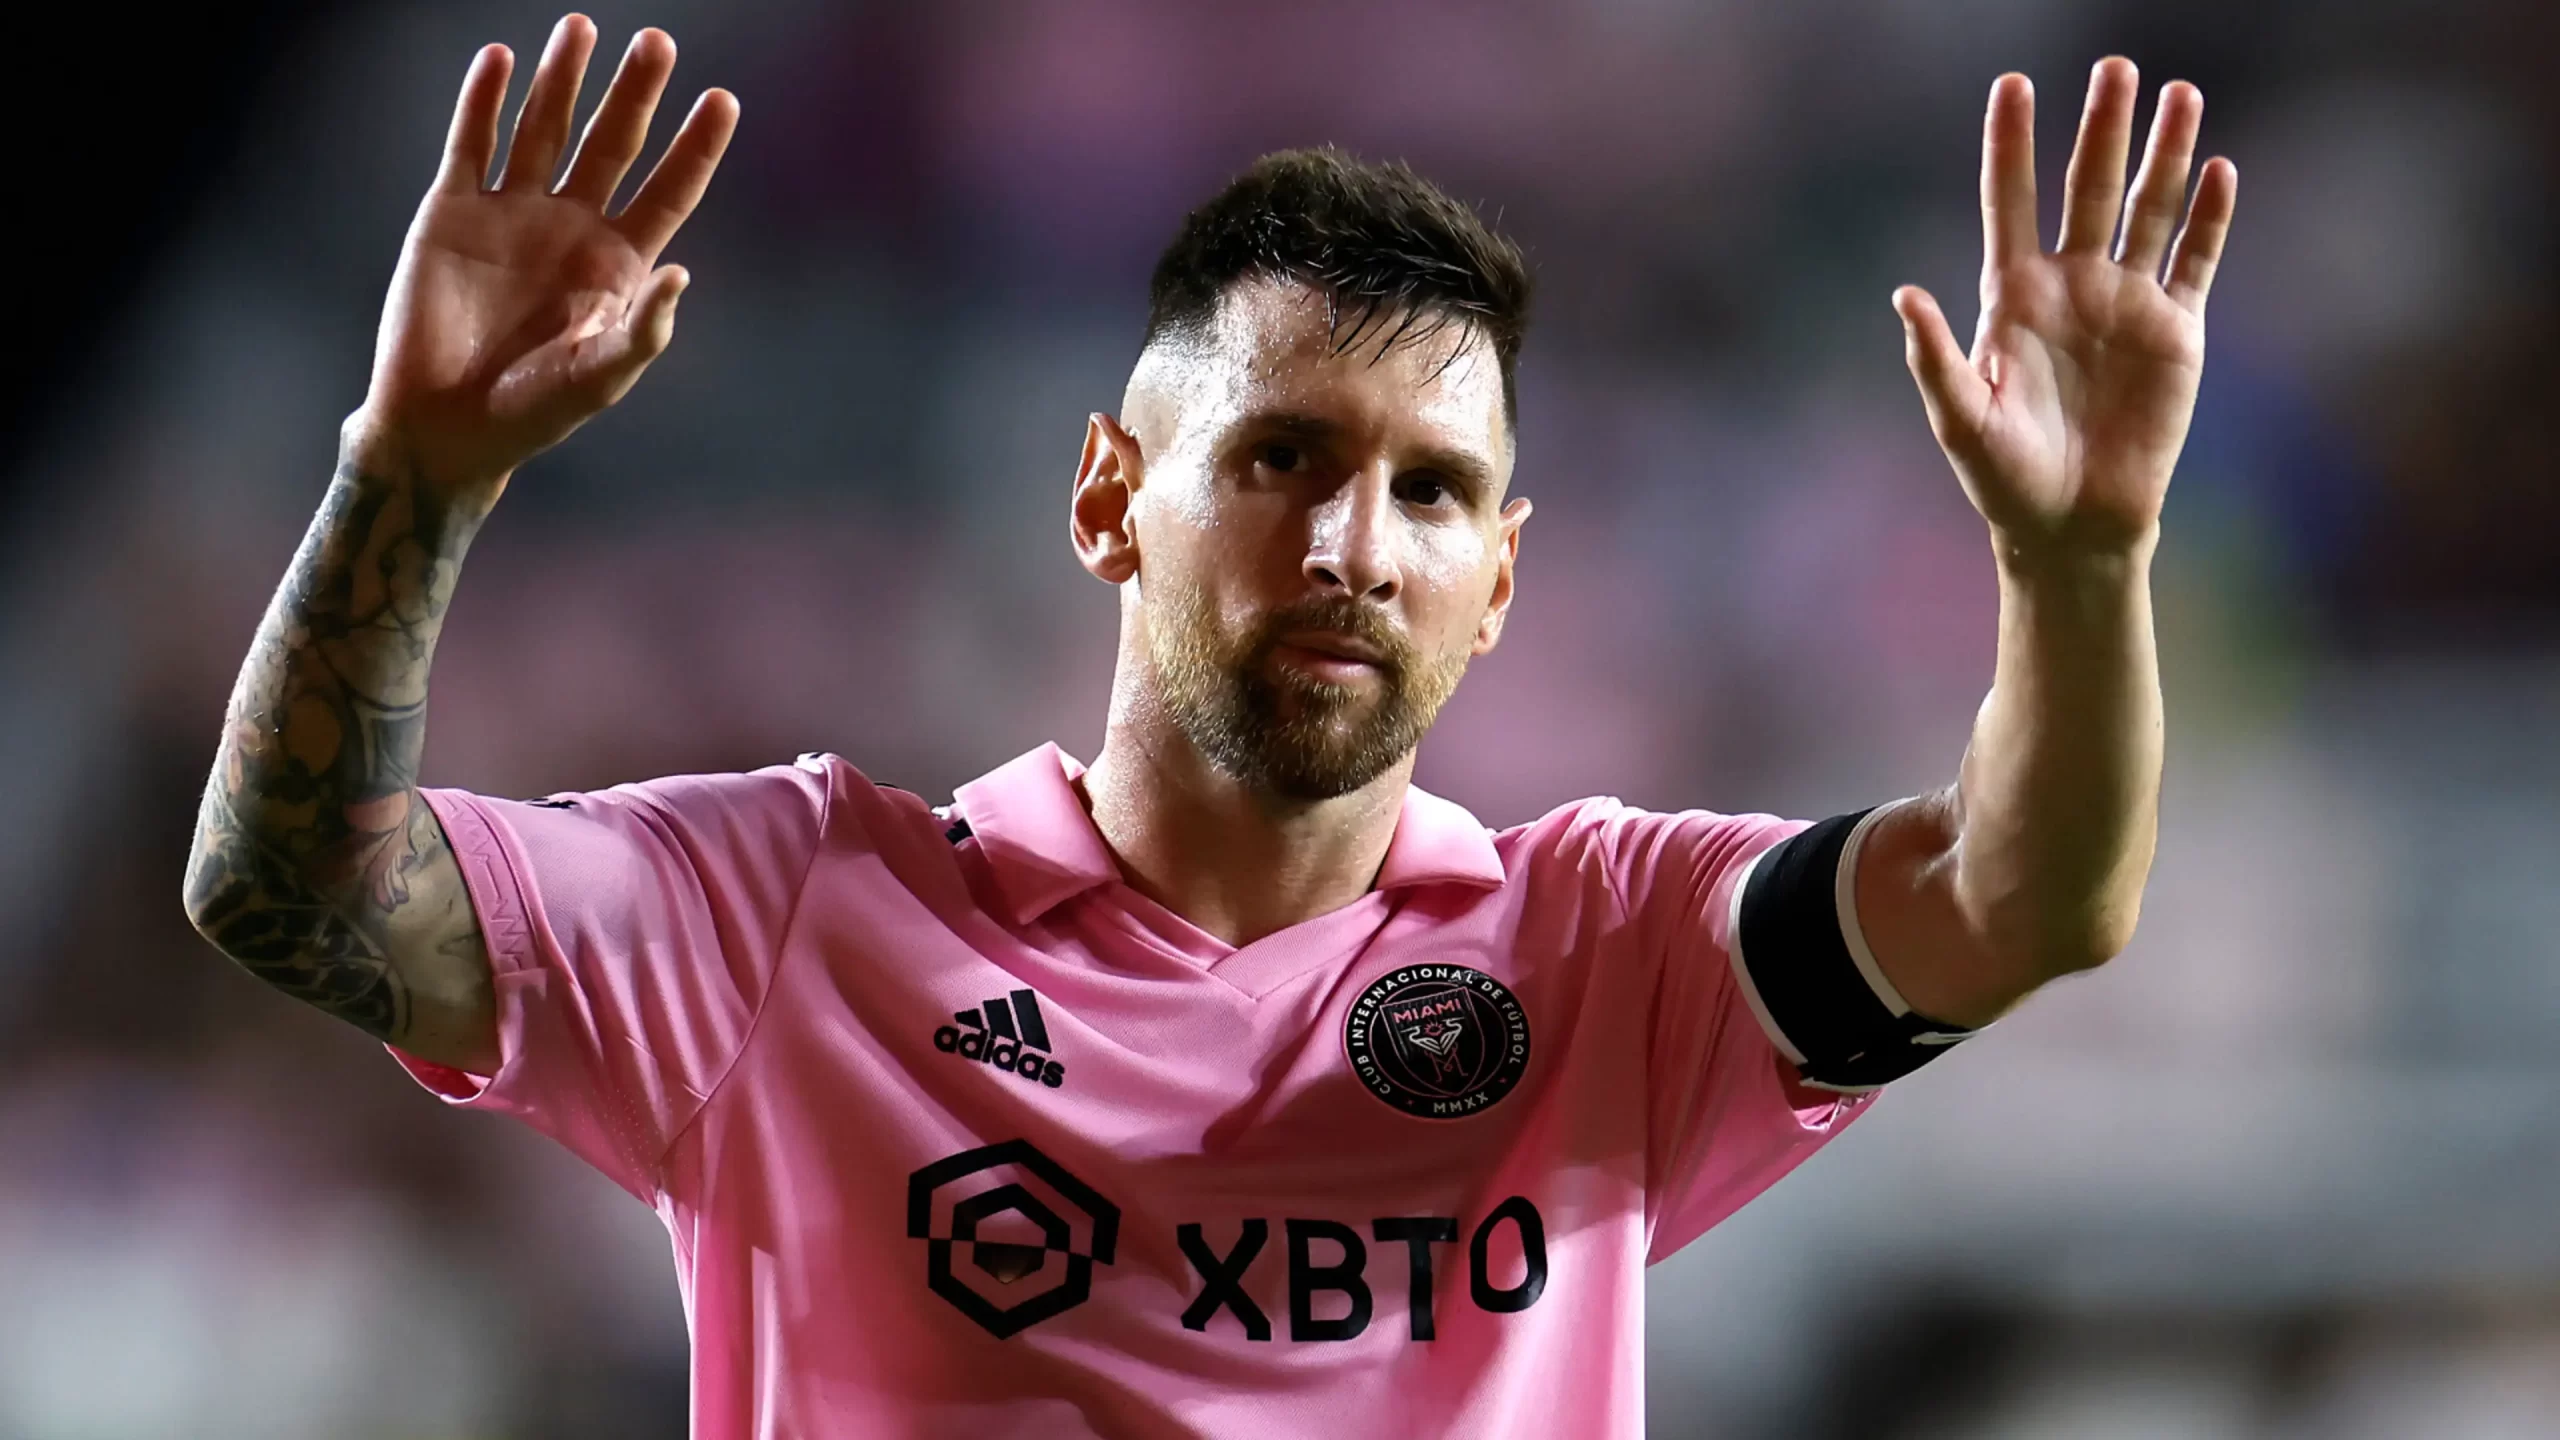 Lionel Messi And Inter Miami Asked To ‘Stay Out’ Of Los Angeles Hotel